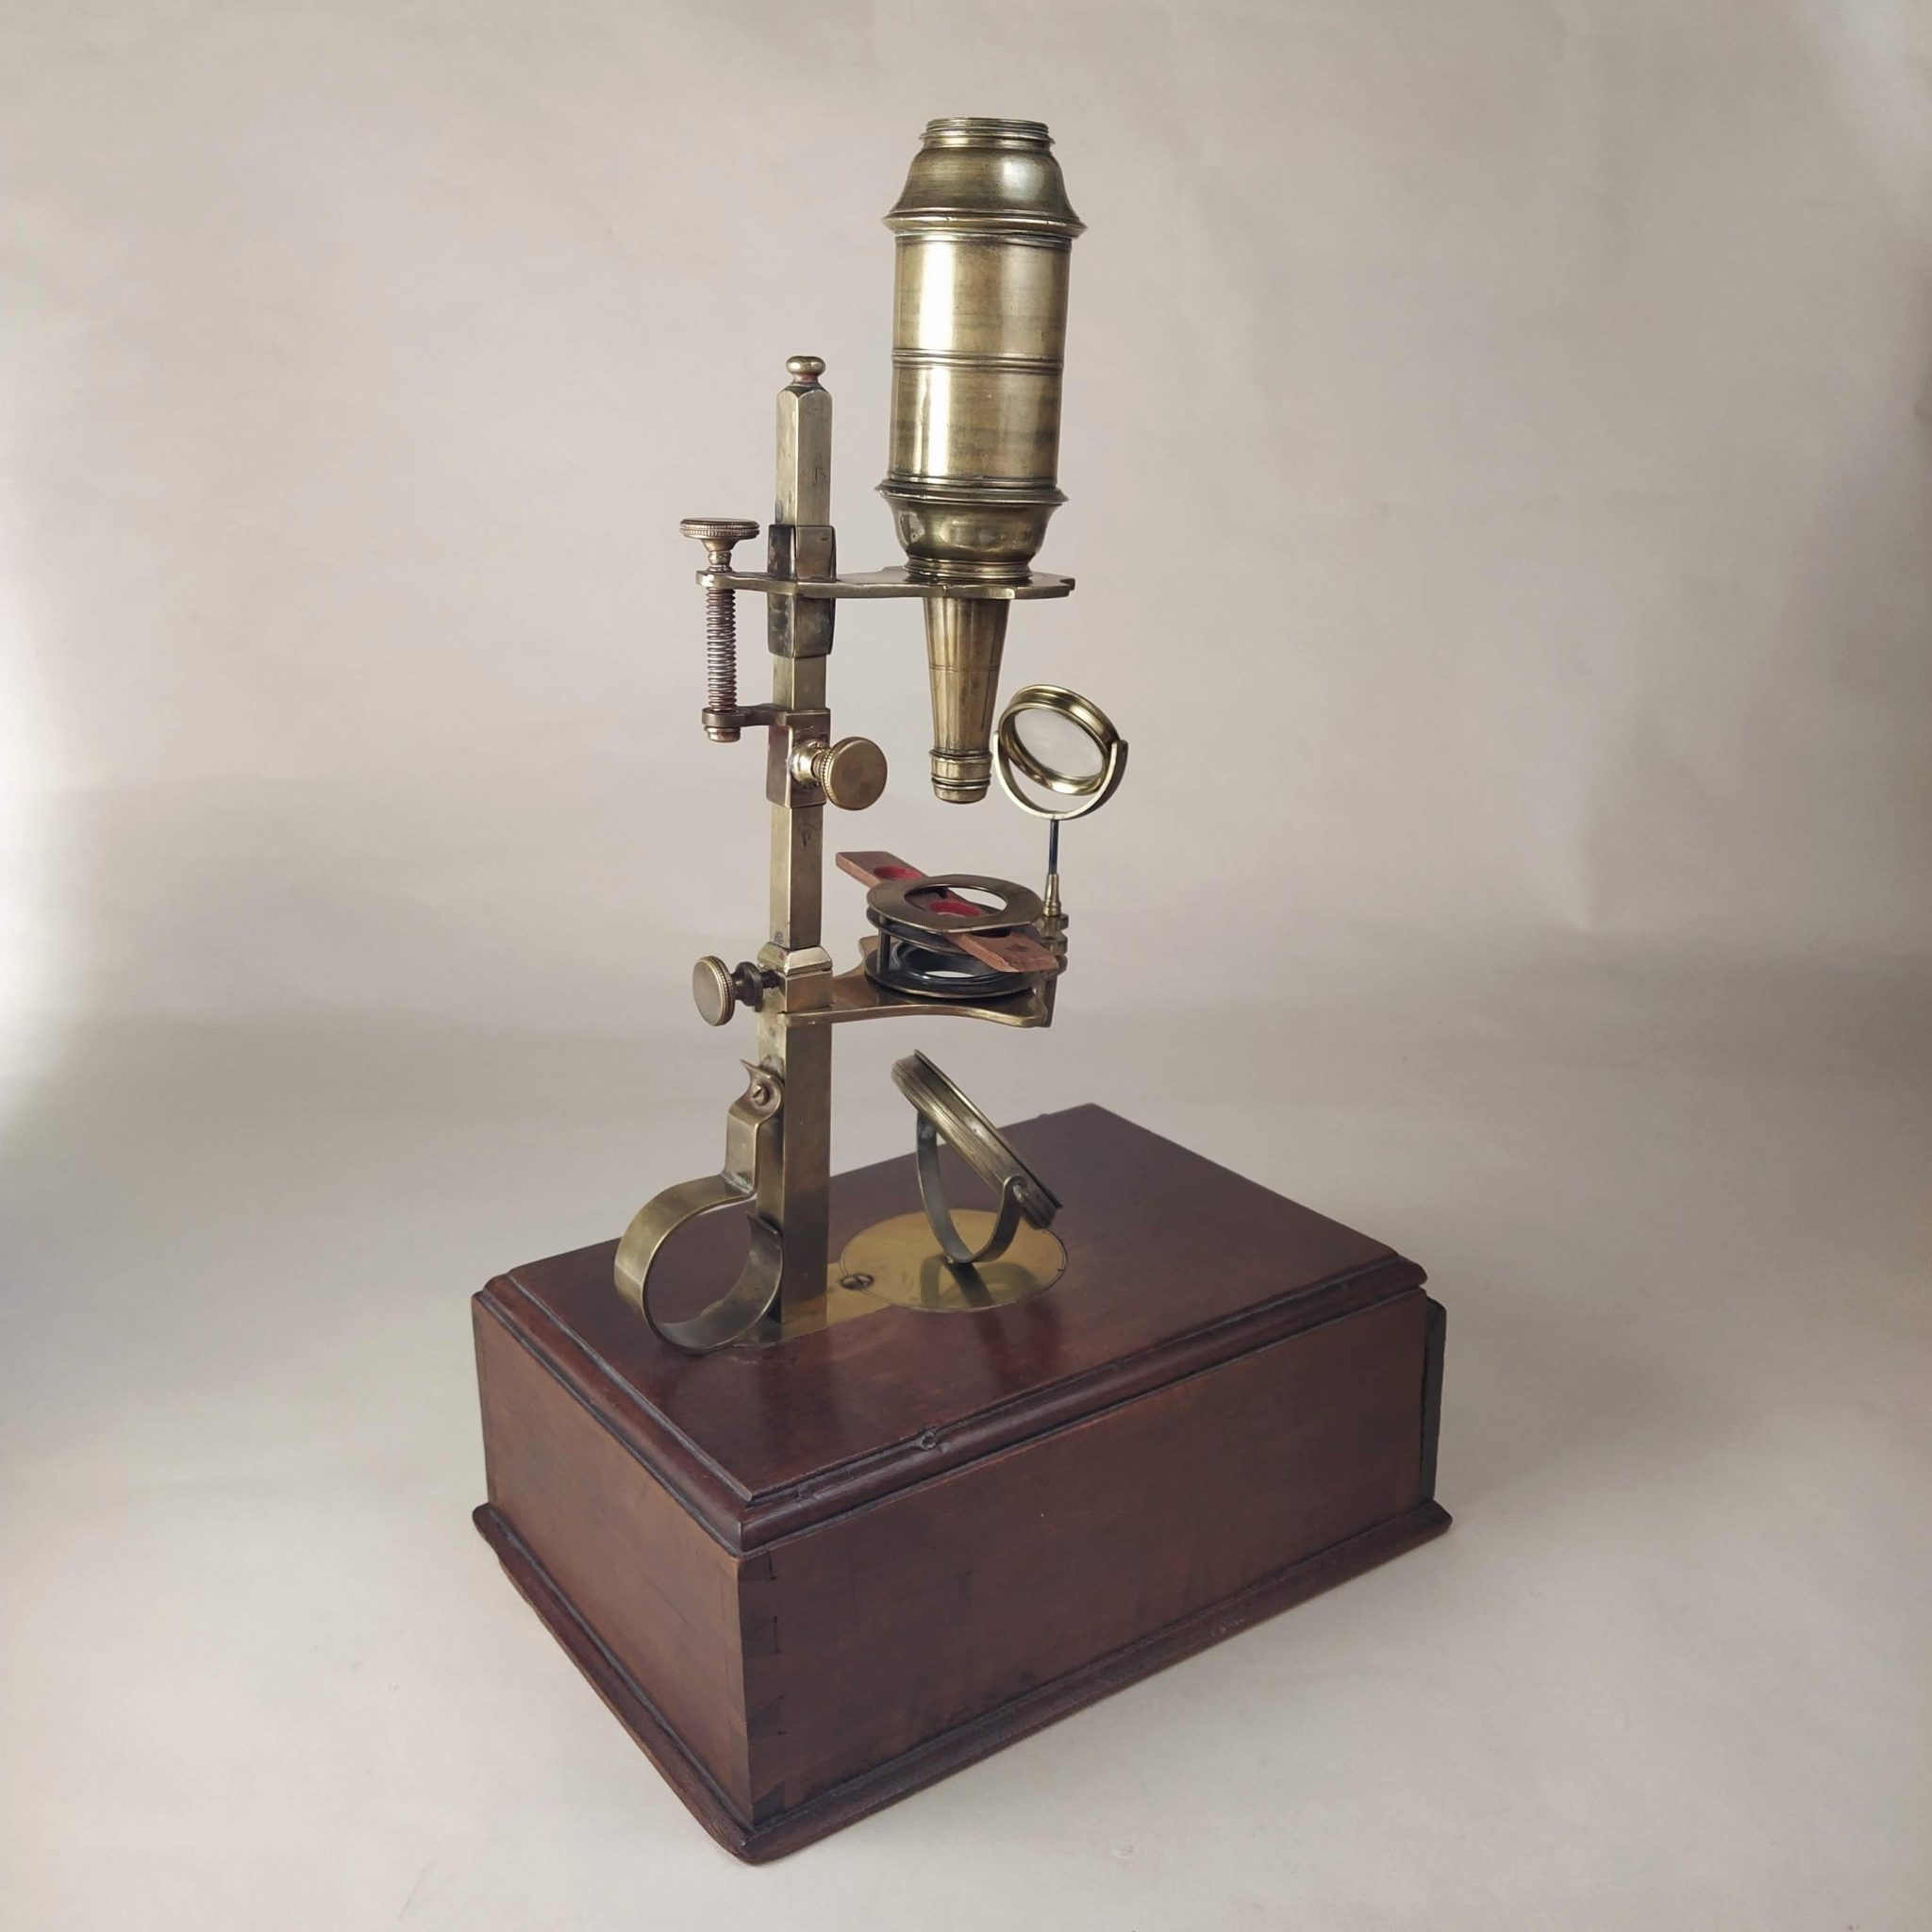 A Cuff-type microscope, possibly German, late 18th